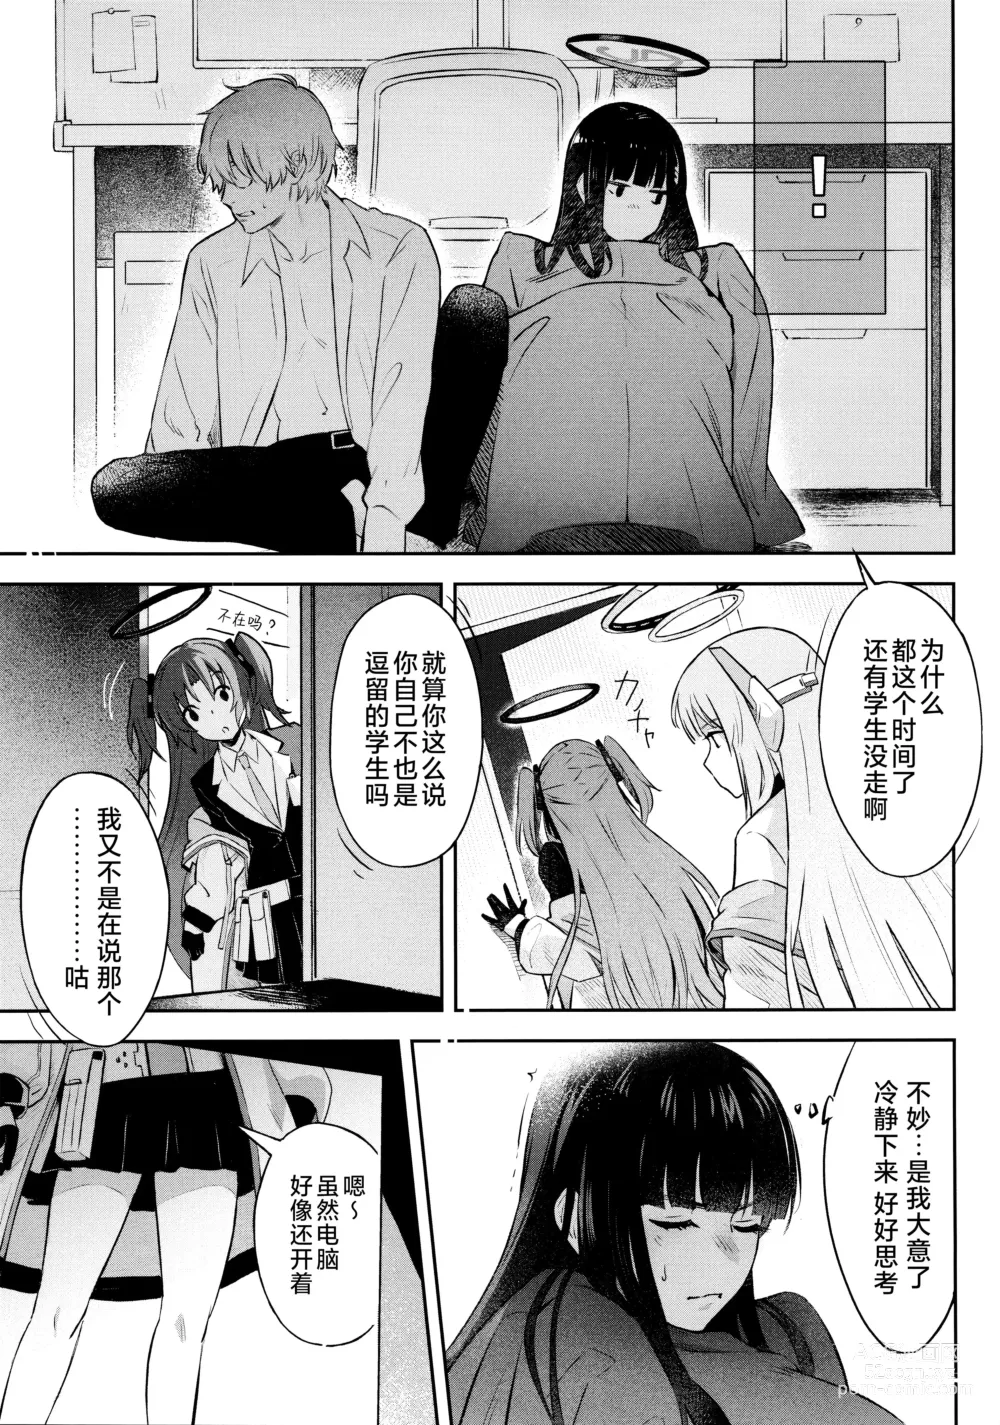 Page 14 of doujinshi 会长亲之恋